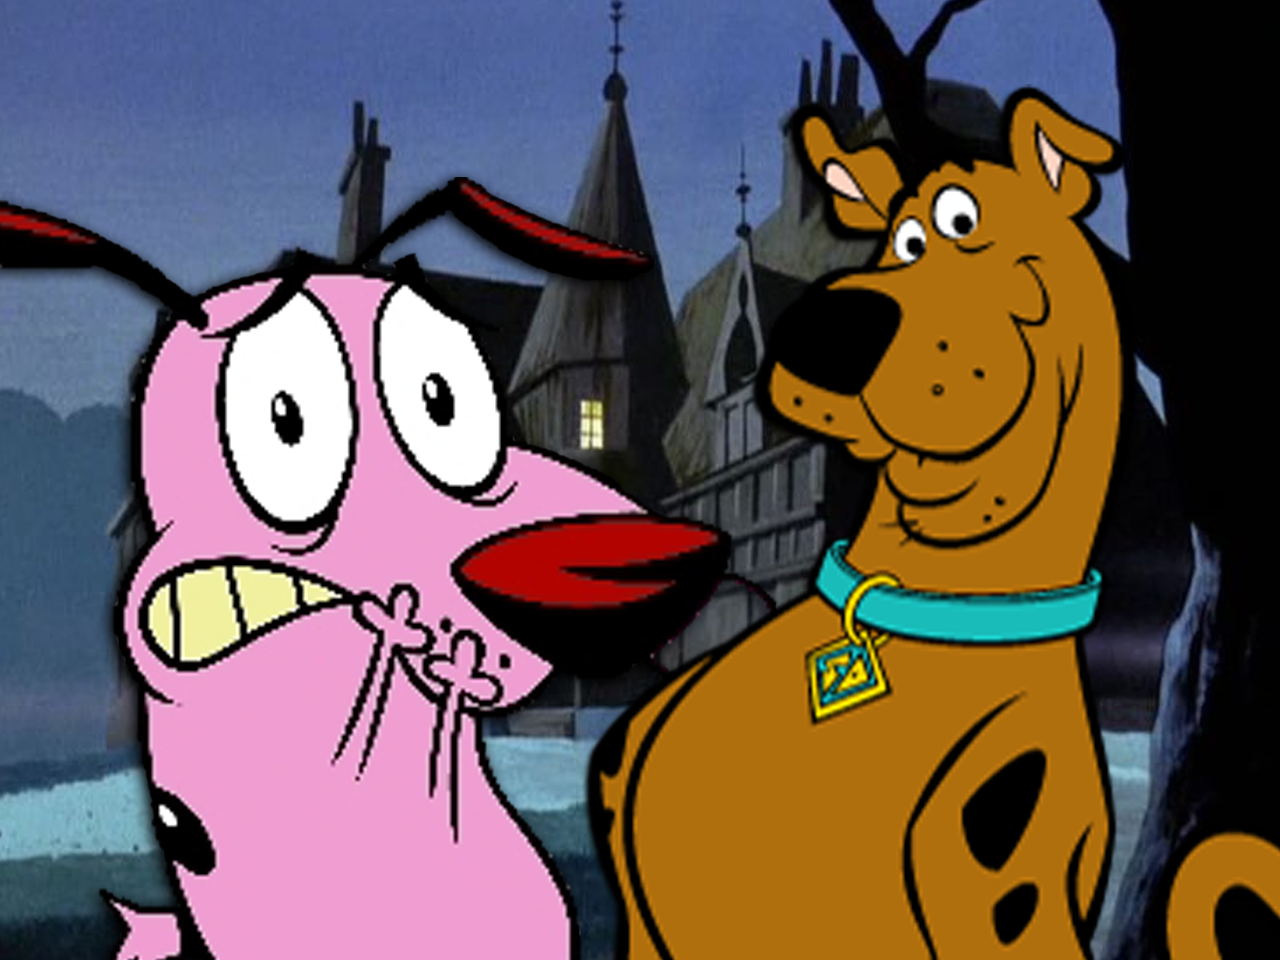 scooby doo meets courage the cowardly dog